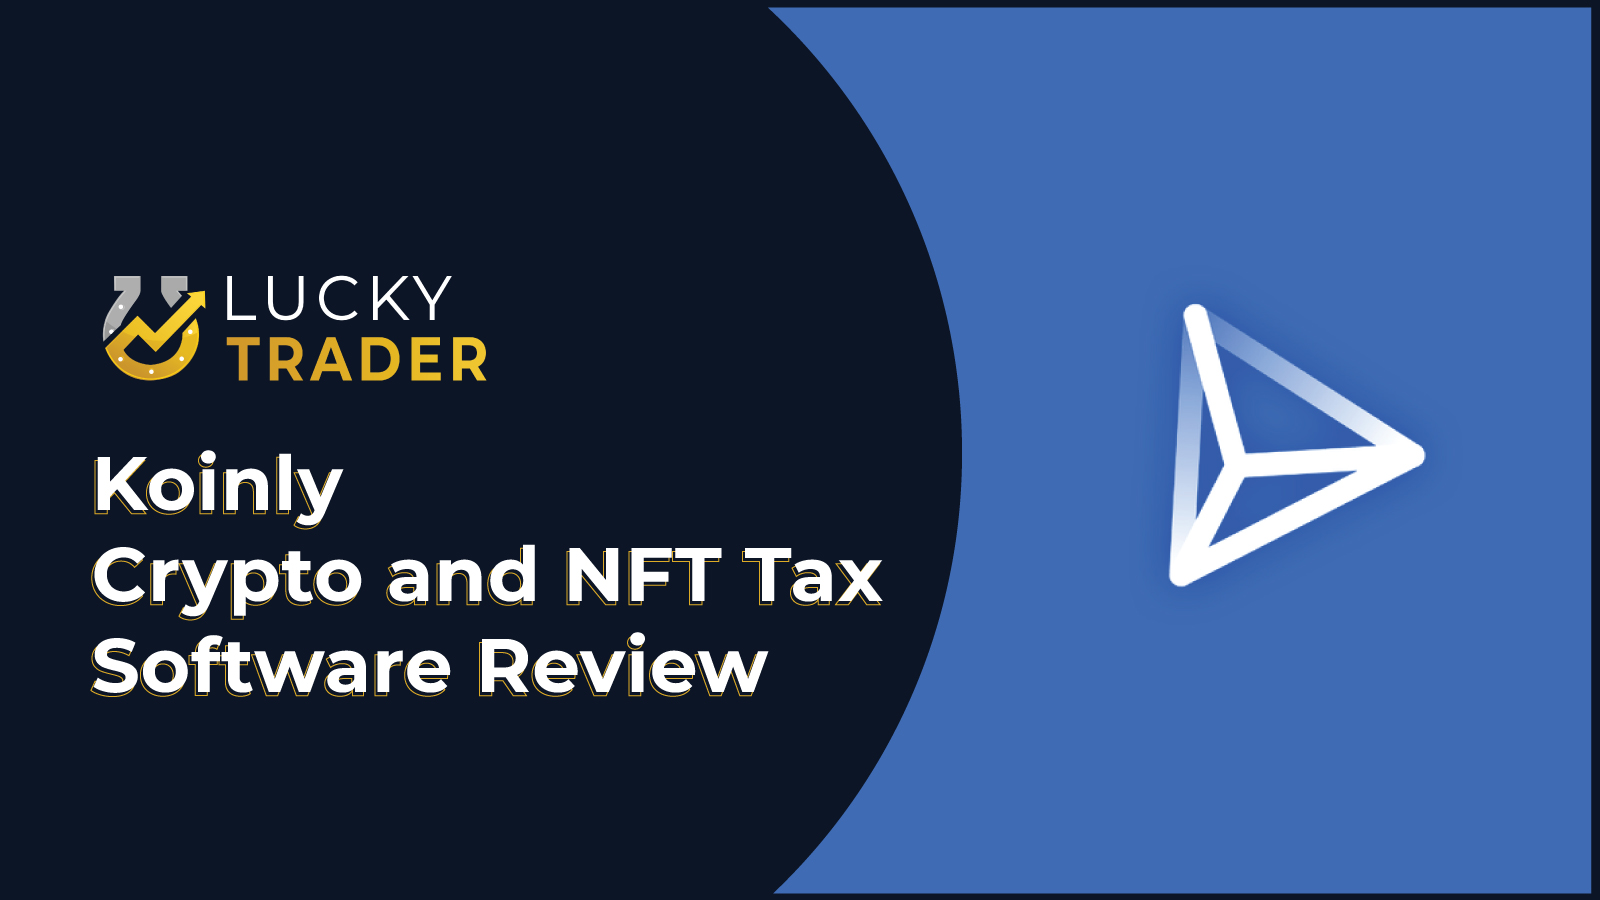 Koinly Cryptocurrency and NFT Tax Software Review